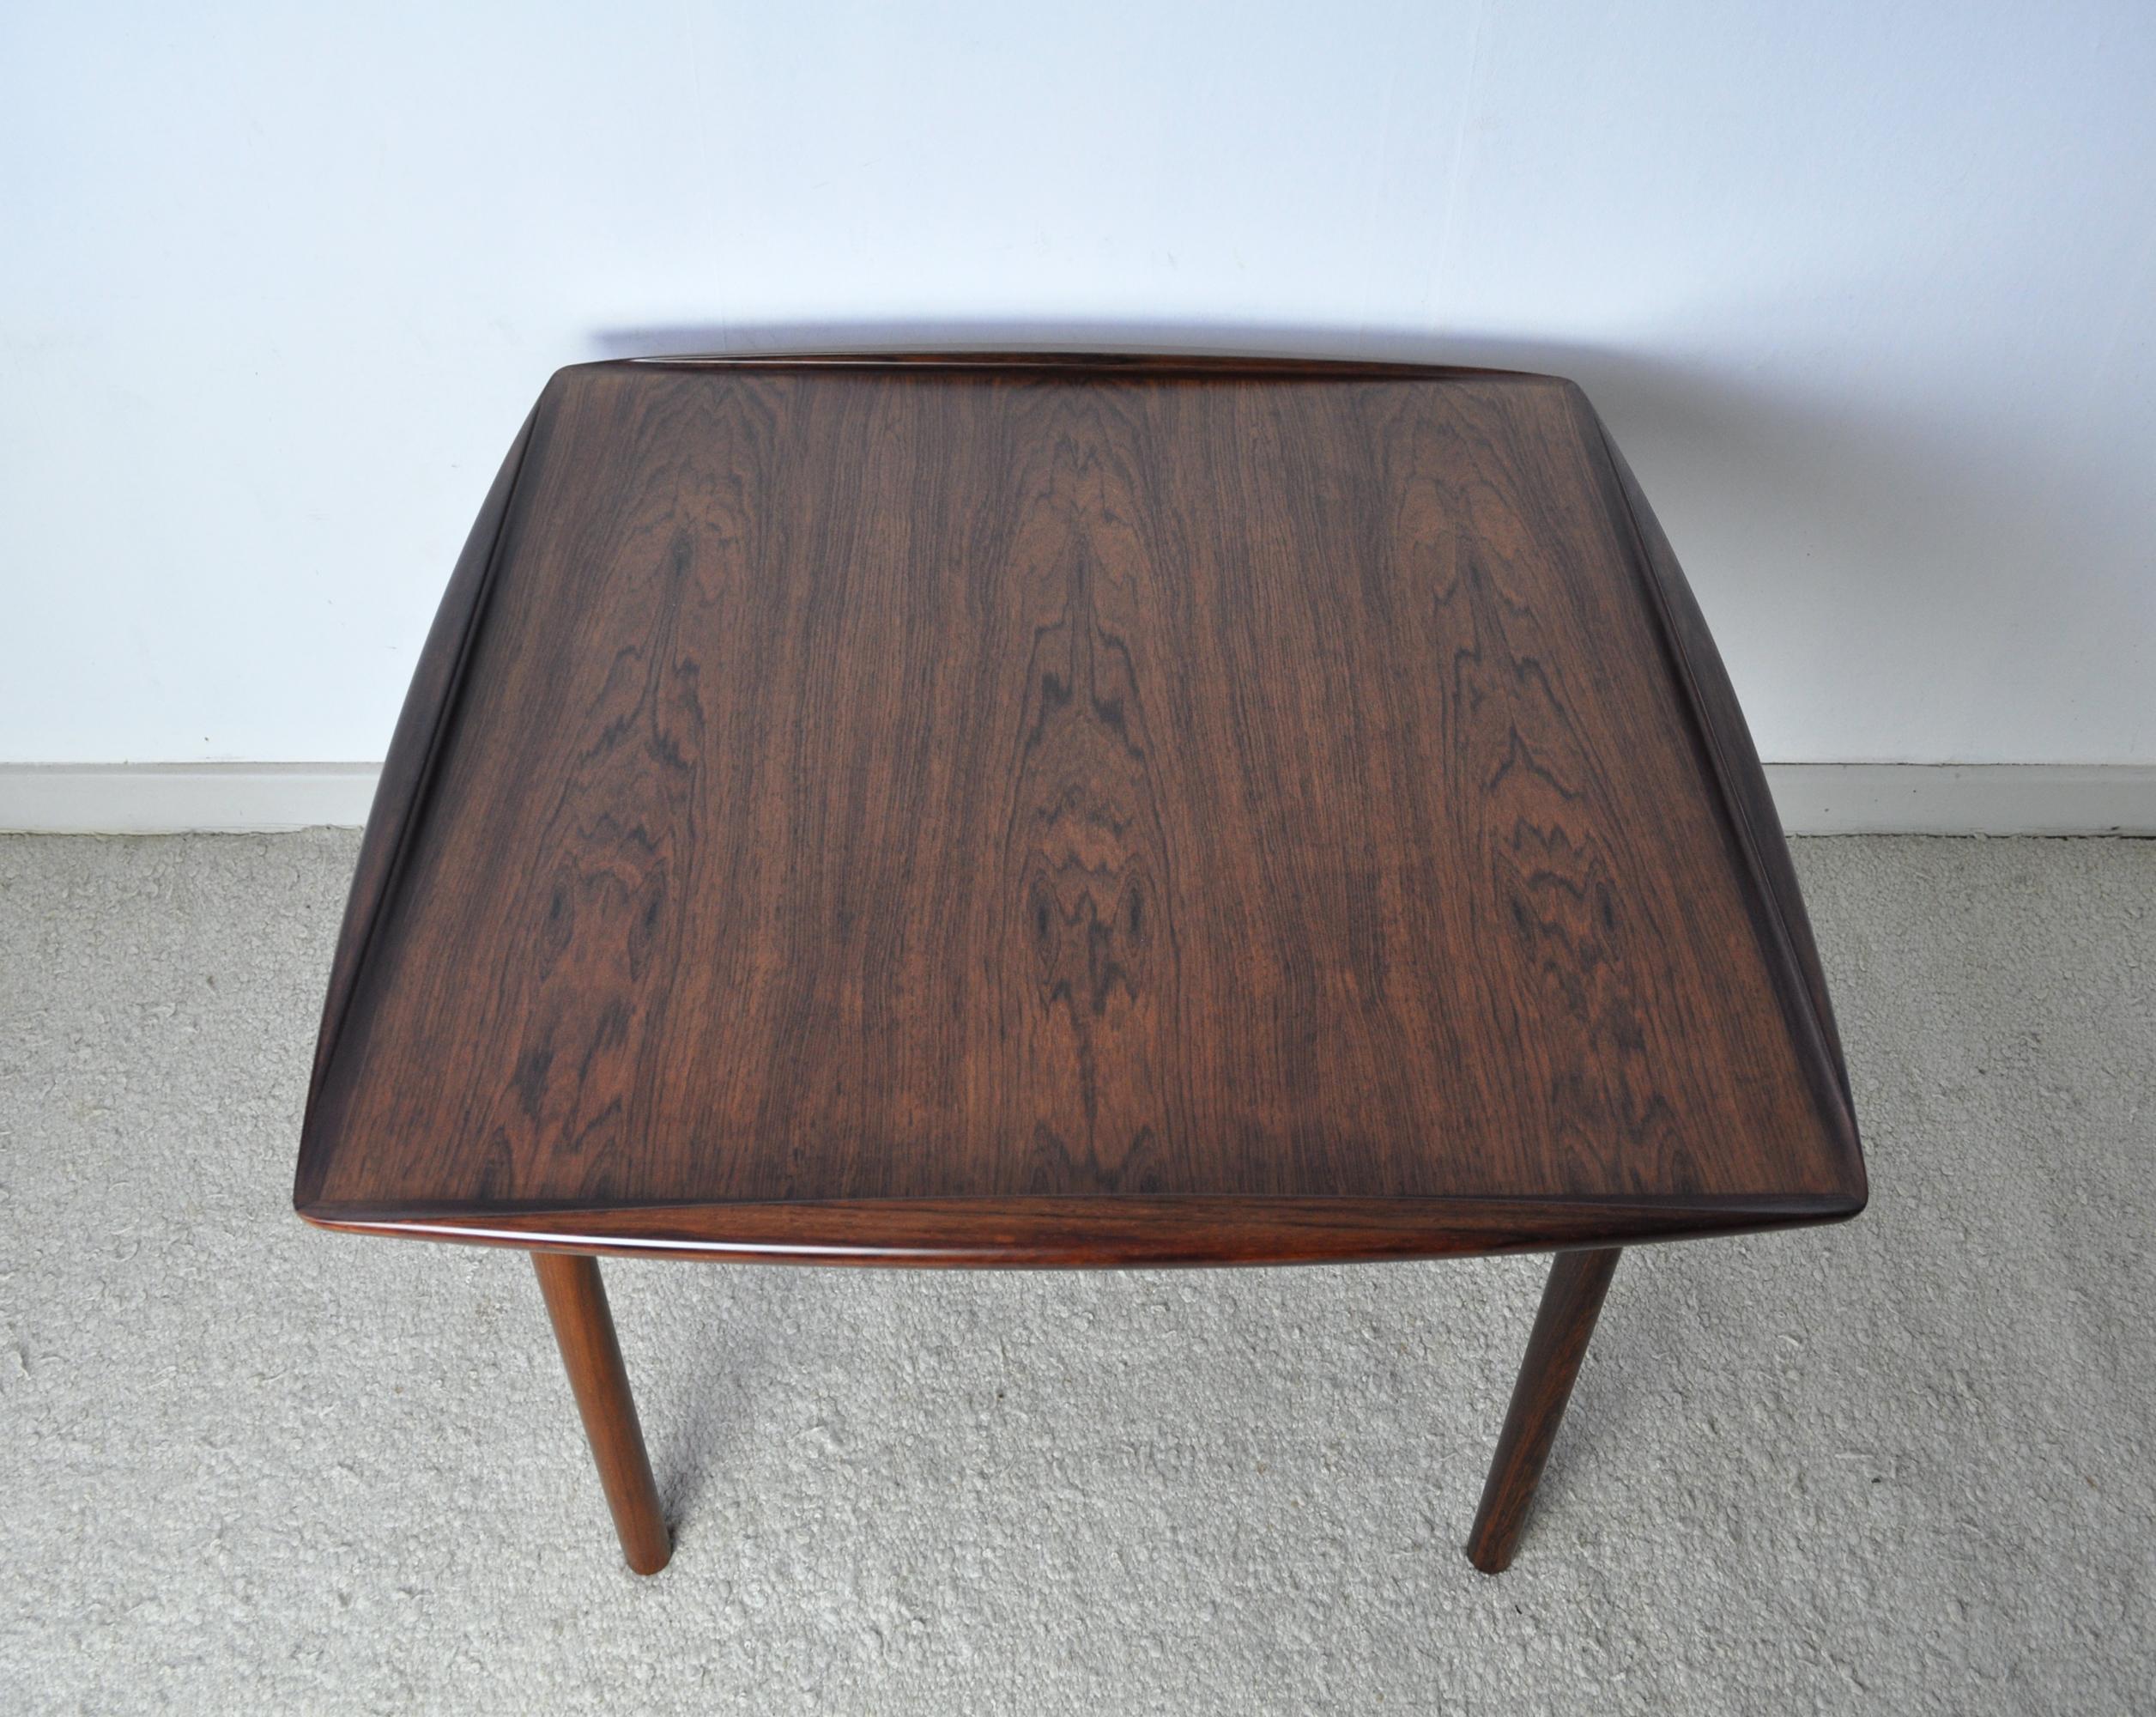 Rare Danish Modern Rosewood Coffee Table by Grete Jalk for P. Jeppesen In Good Condition For Sale In Vordingborg, DK